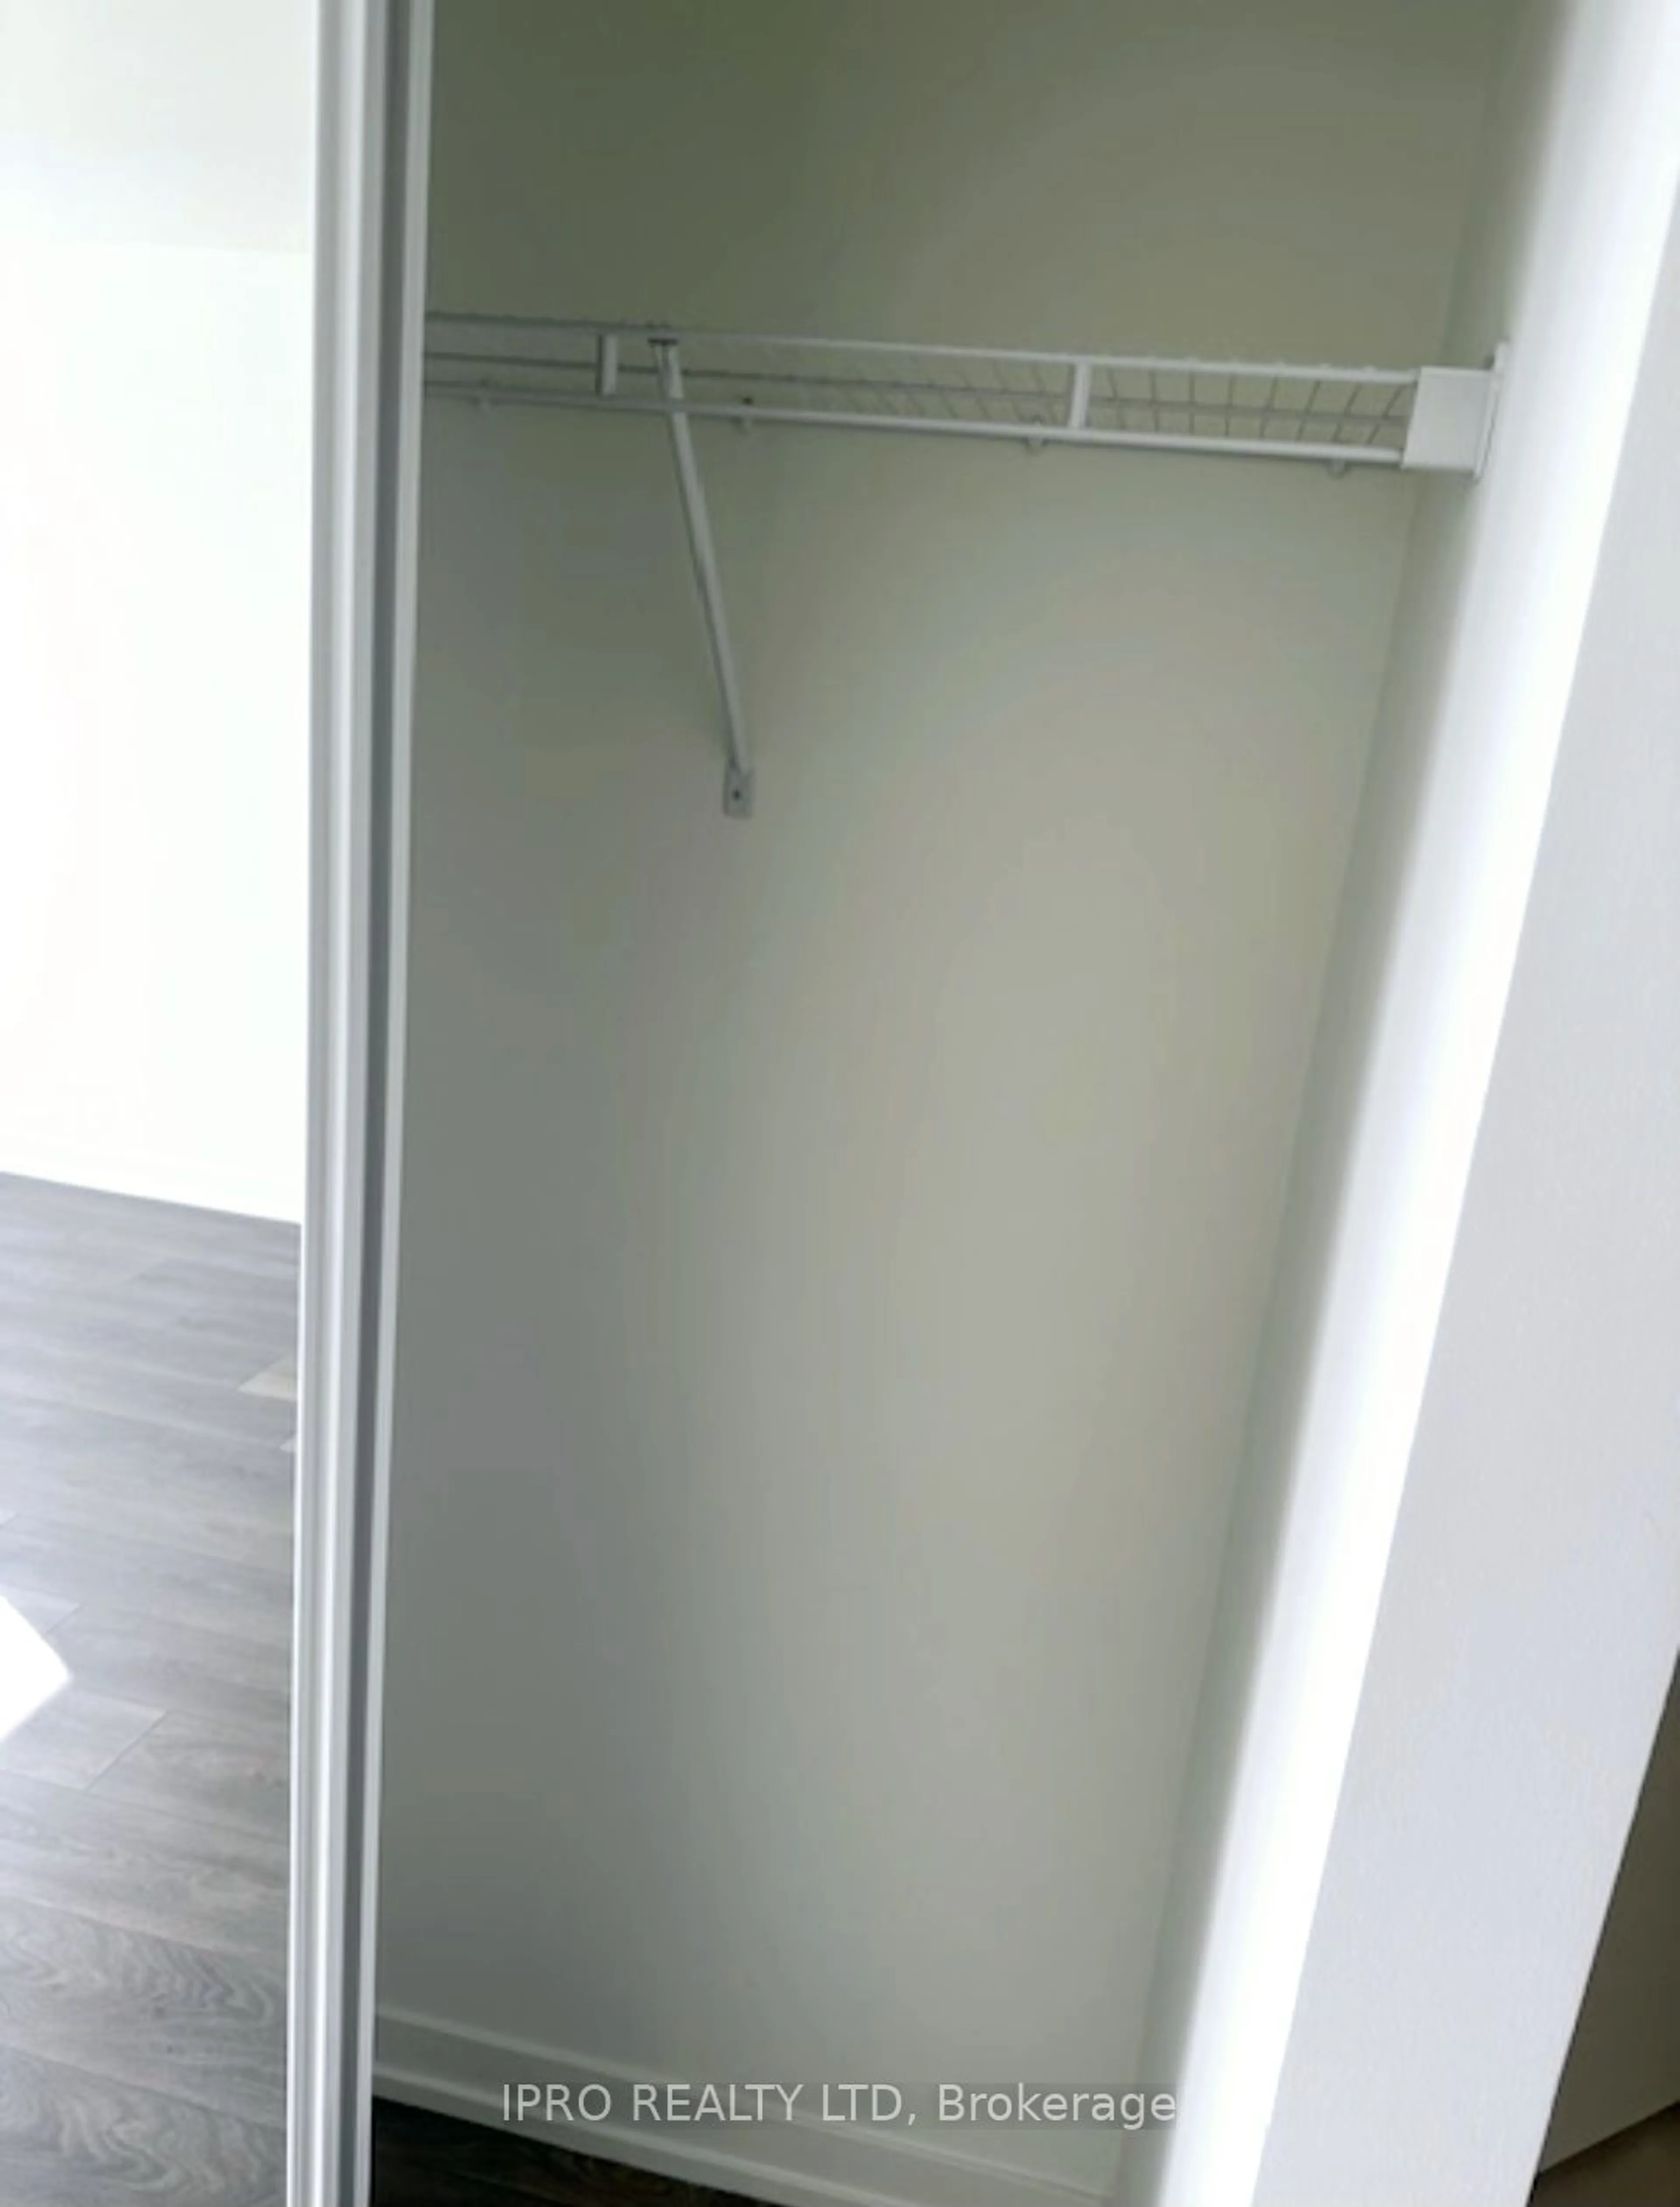 Storage room or clothes room or walk-in closet for 135 Canon Jackson Dr #604, Toronto Ontario M6M 0C3